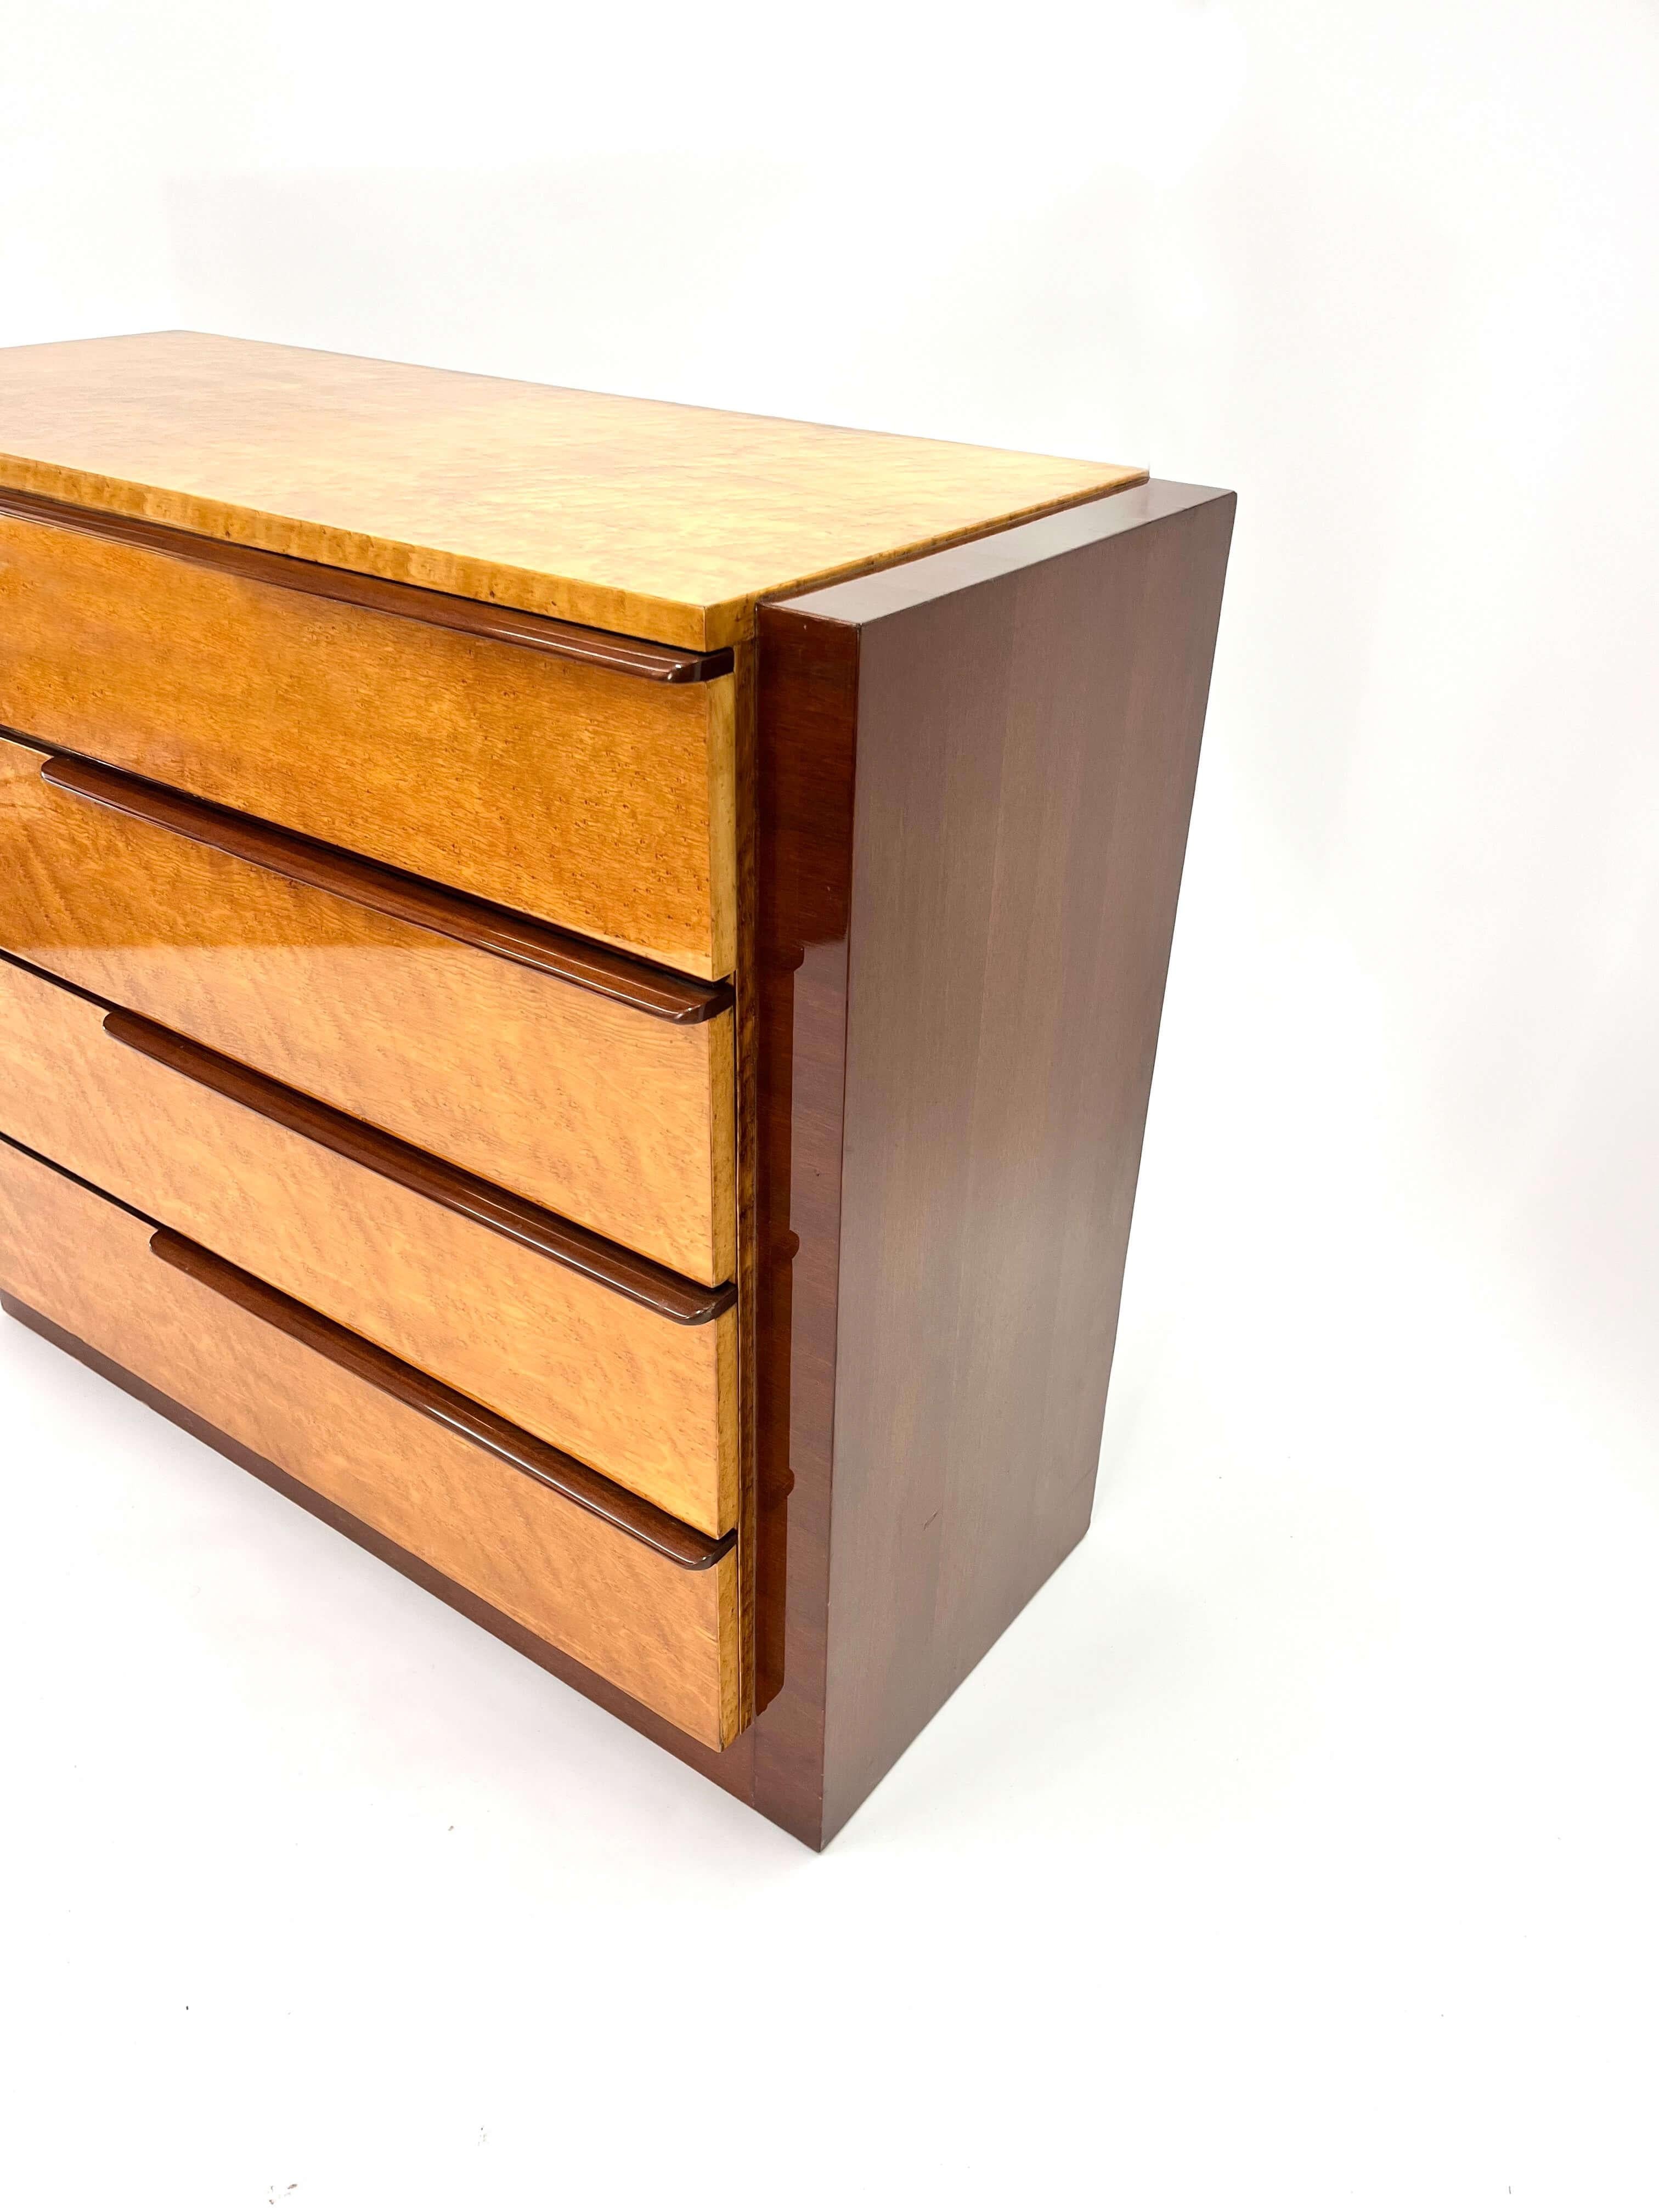 20th Century Gilbert Rohde Chest of Drawers for Herman Miller in Birdseye Maple and Mahogany